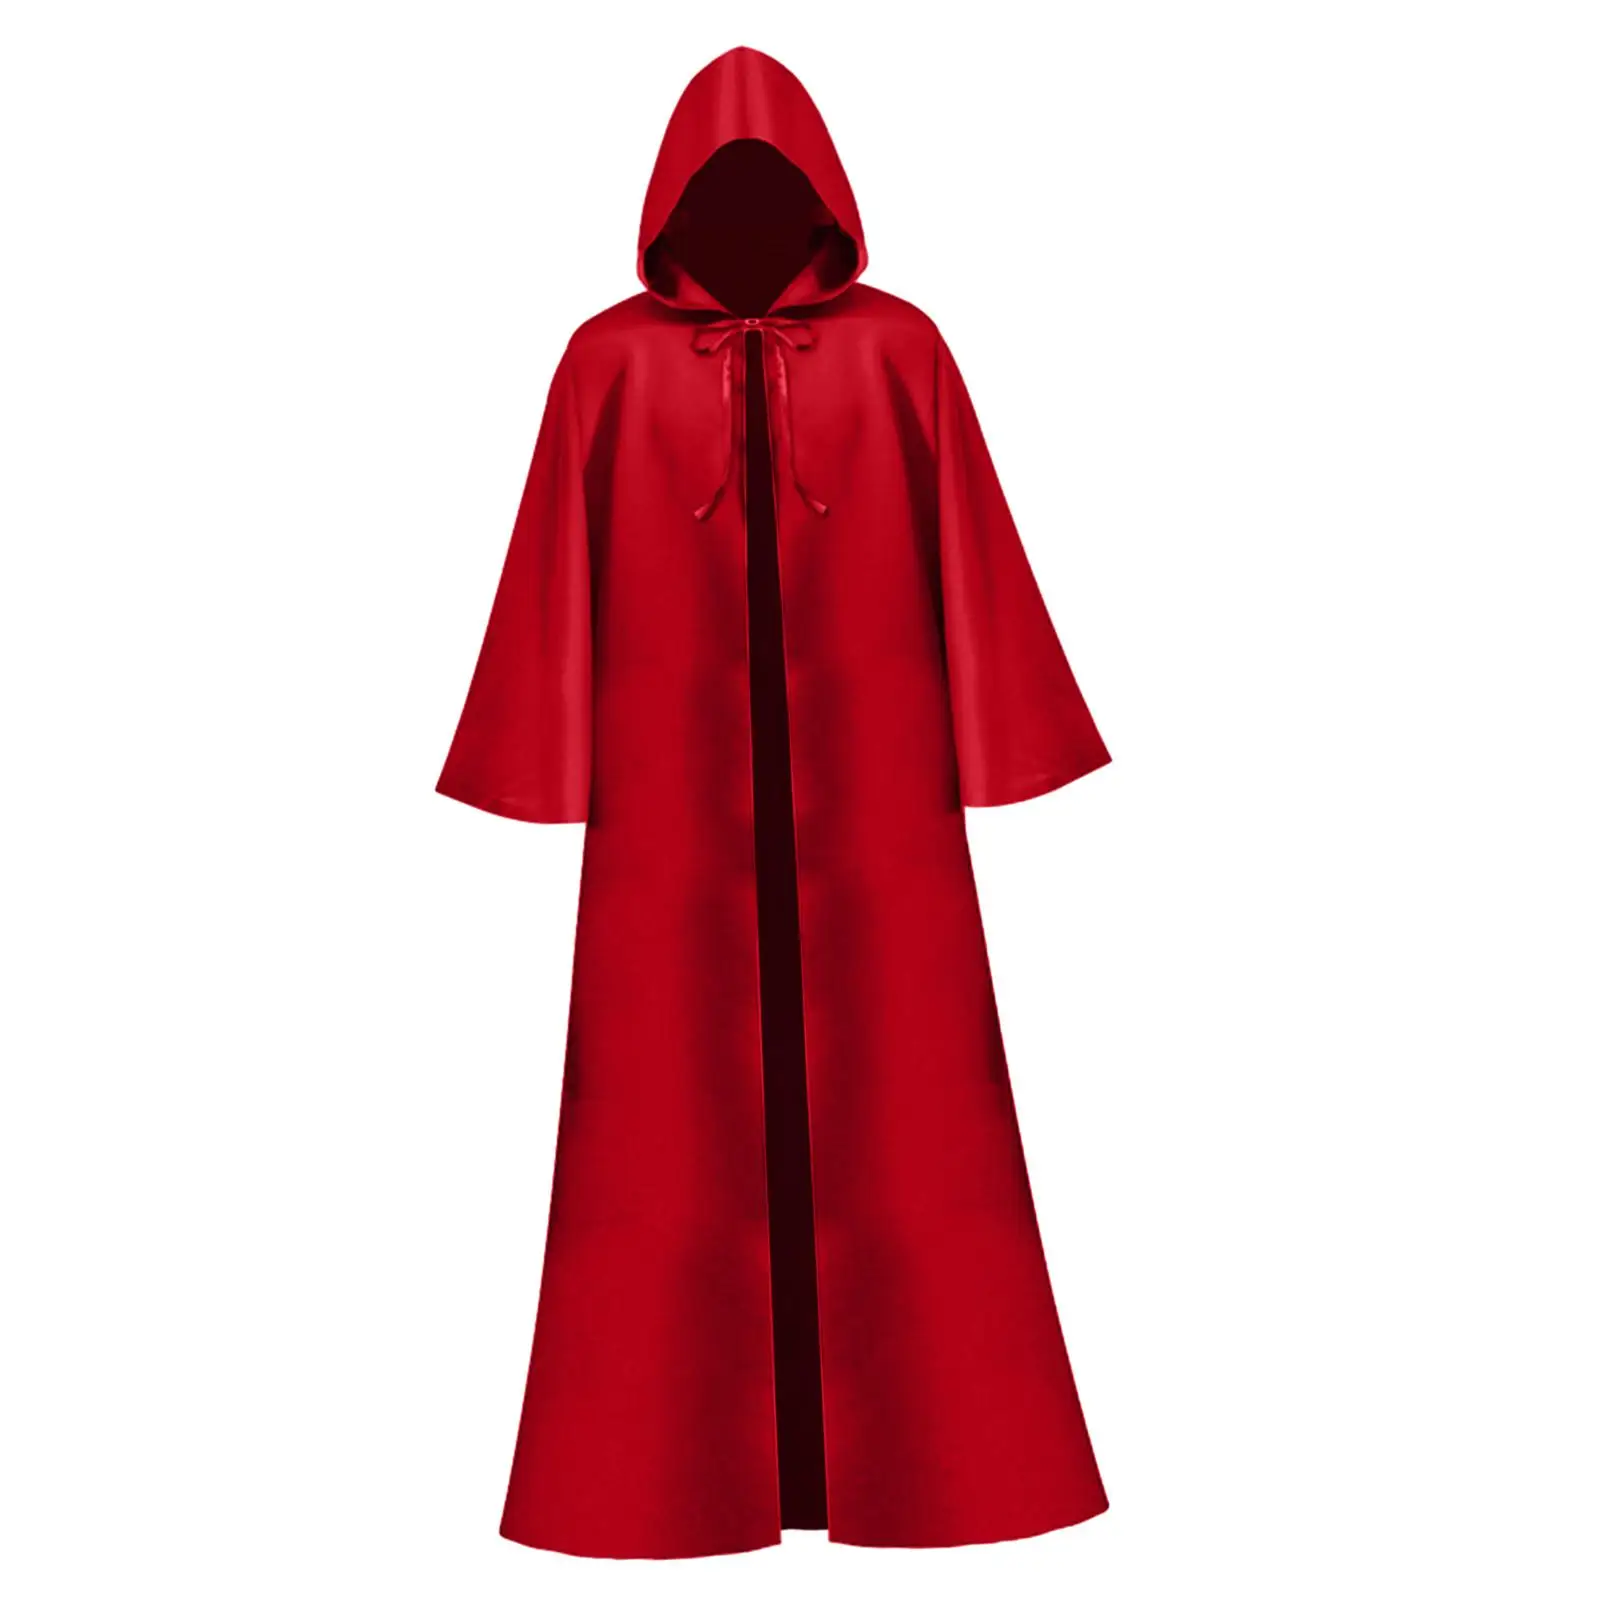 Halloween Hooded Cloak Cowl Full Length Long Hooded Cloak for Vintage Gathering Performance Fancy Dress Party Punk Party